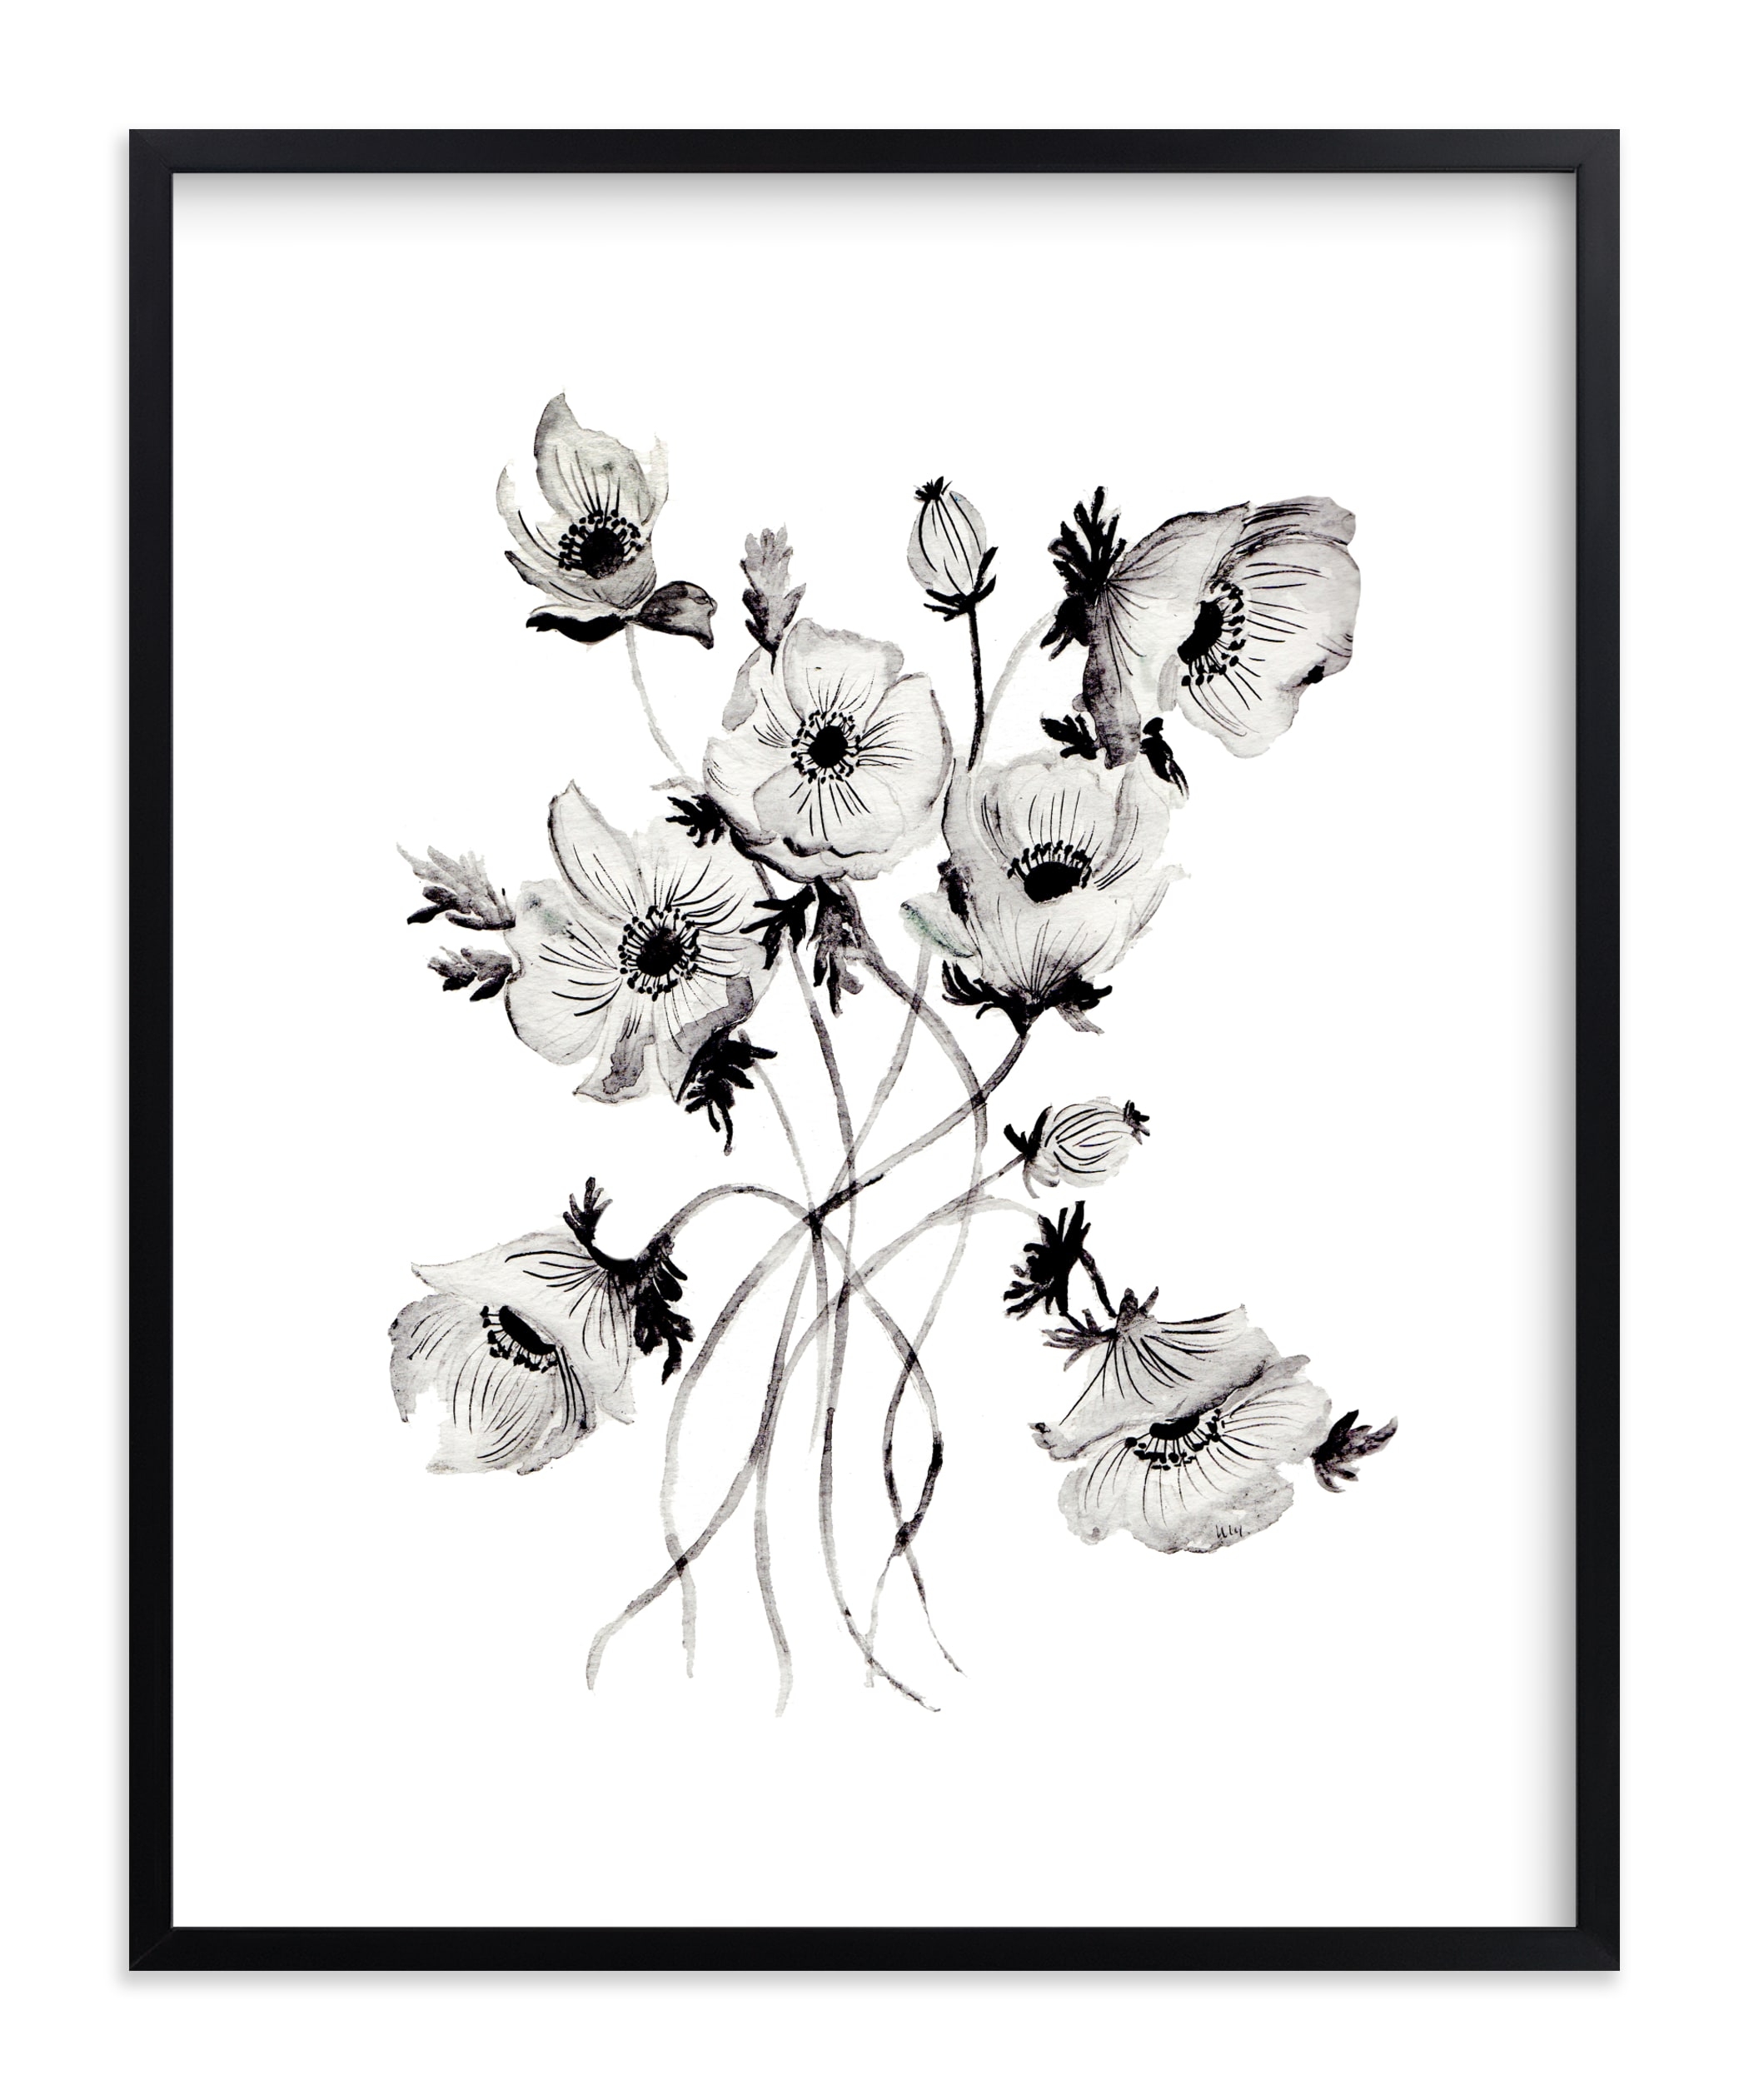 Greyscale Poppies Limited Edition Art Print - Image 0